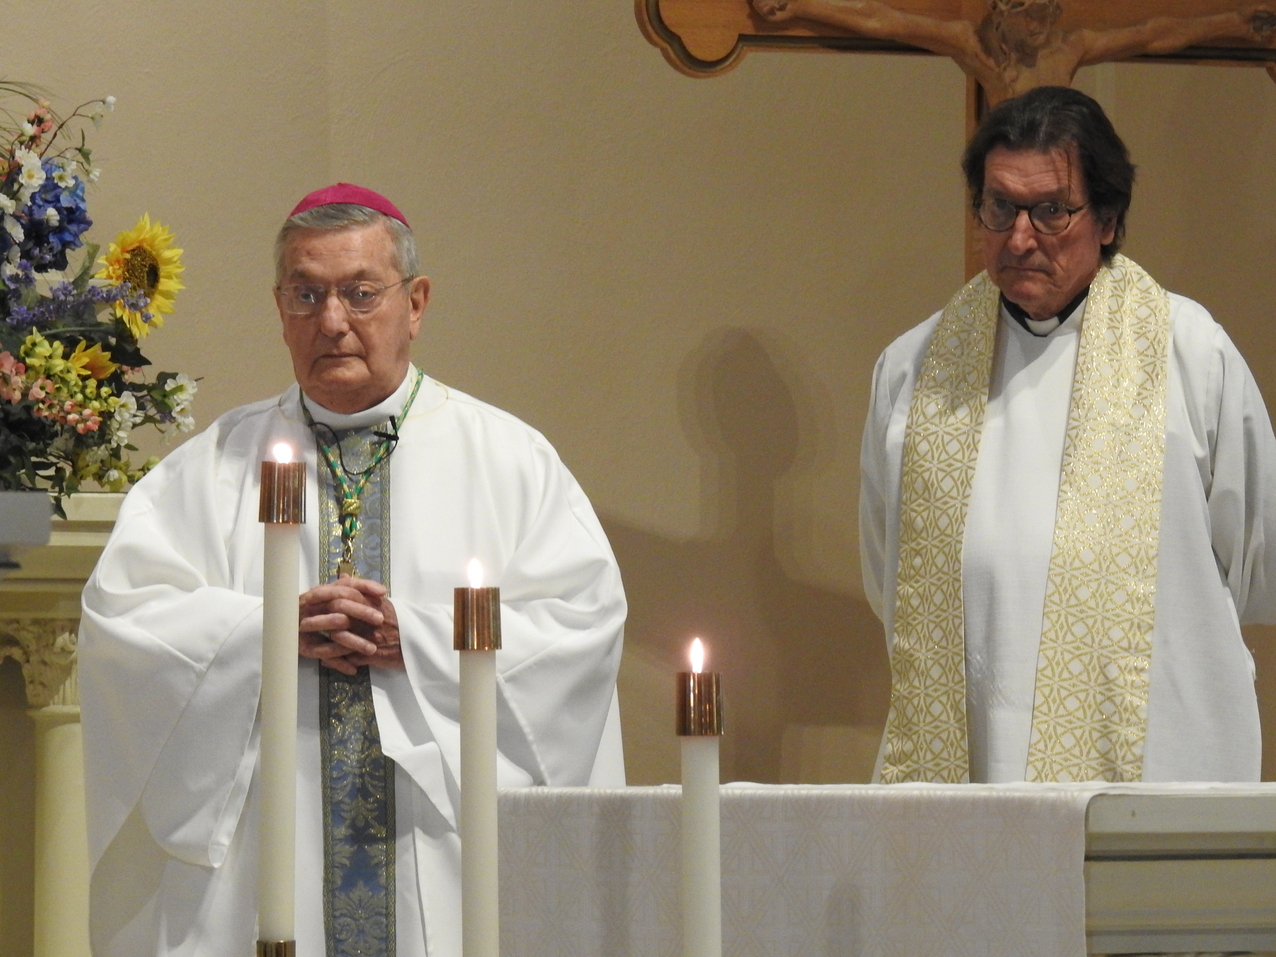 Bishop Malesic celebrates Mass, experiences his first ‘Feast’ in Cleveland